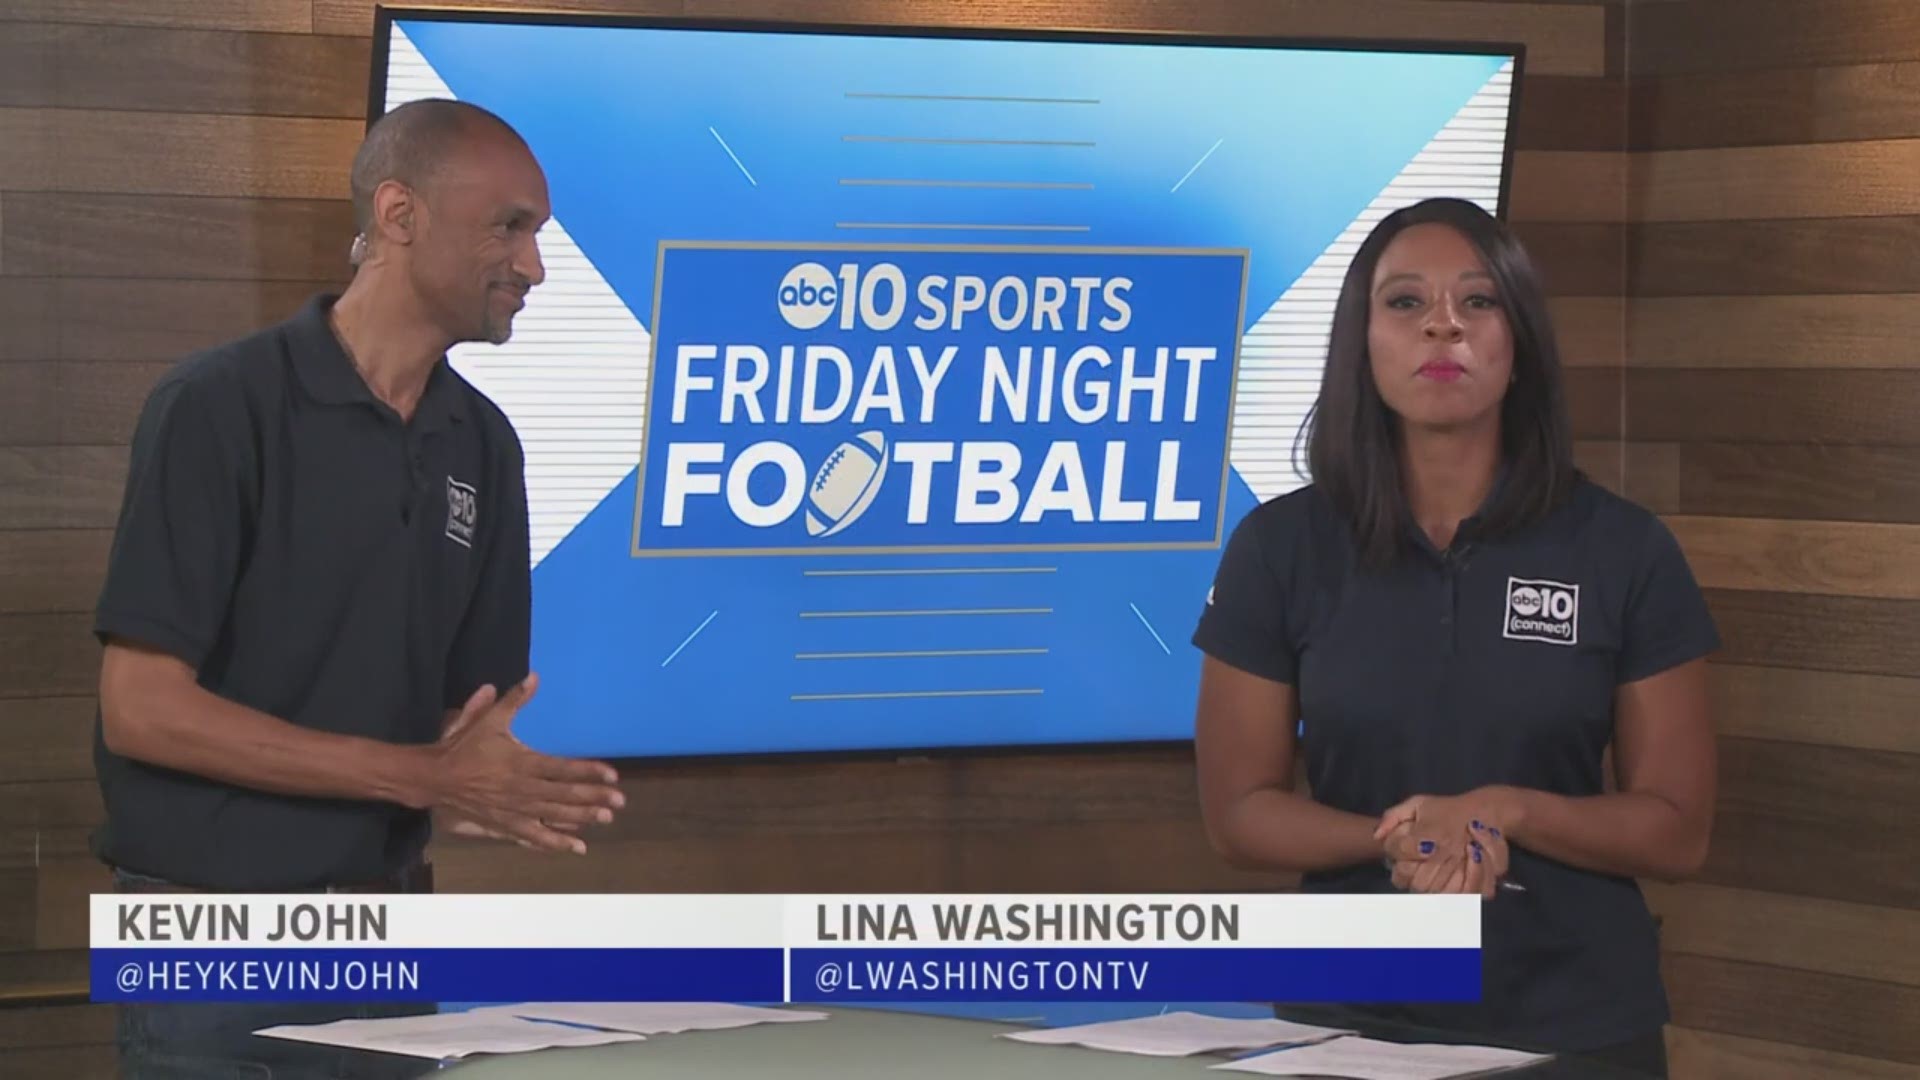 ABC10’s Lina Washington and Kevin John guide you through all of week three’s high school football action across the Sacramento region, where the Folsom Bulldogs fell to the De la Salle Spartans and the Cosumnes Oaks Wolfpack hand the Monterey Trail Mustangs their first loss of the season.